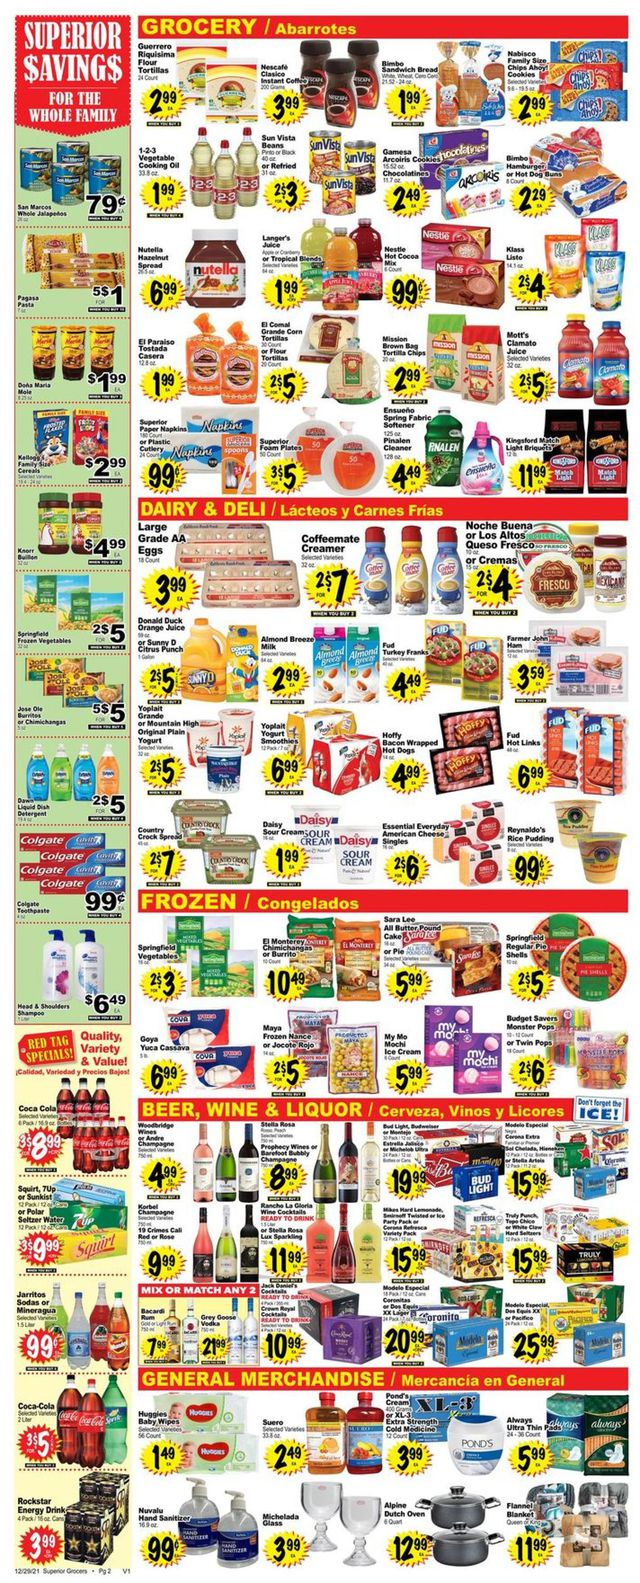 Superior Grocers Ad from 12/29/2021